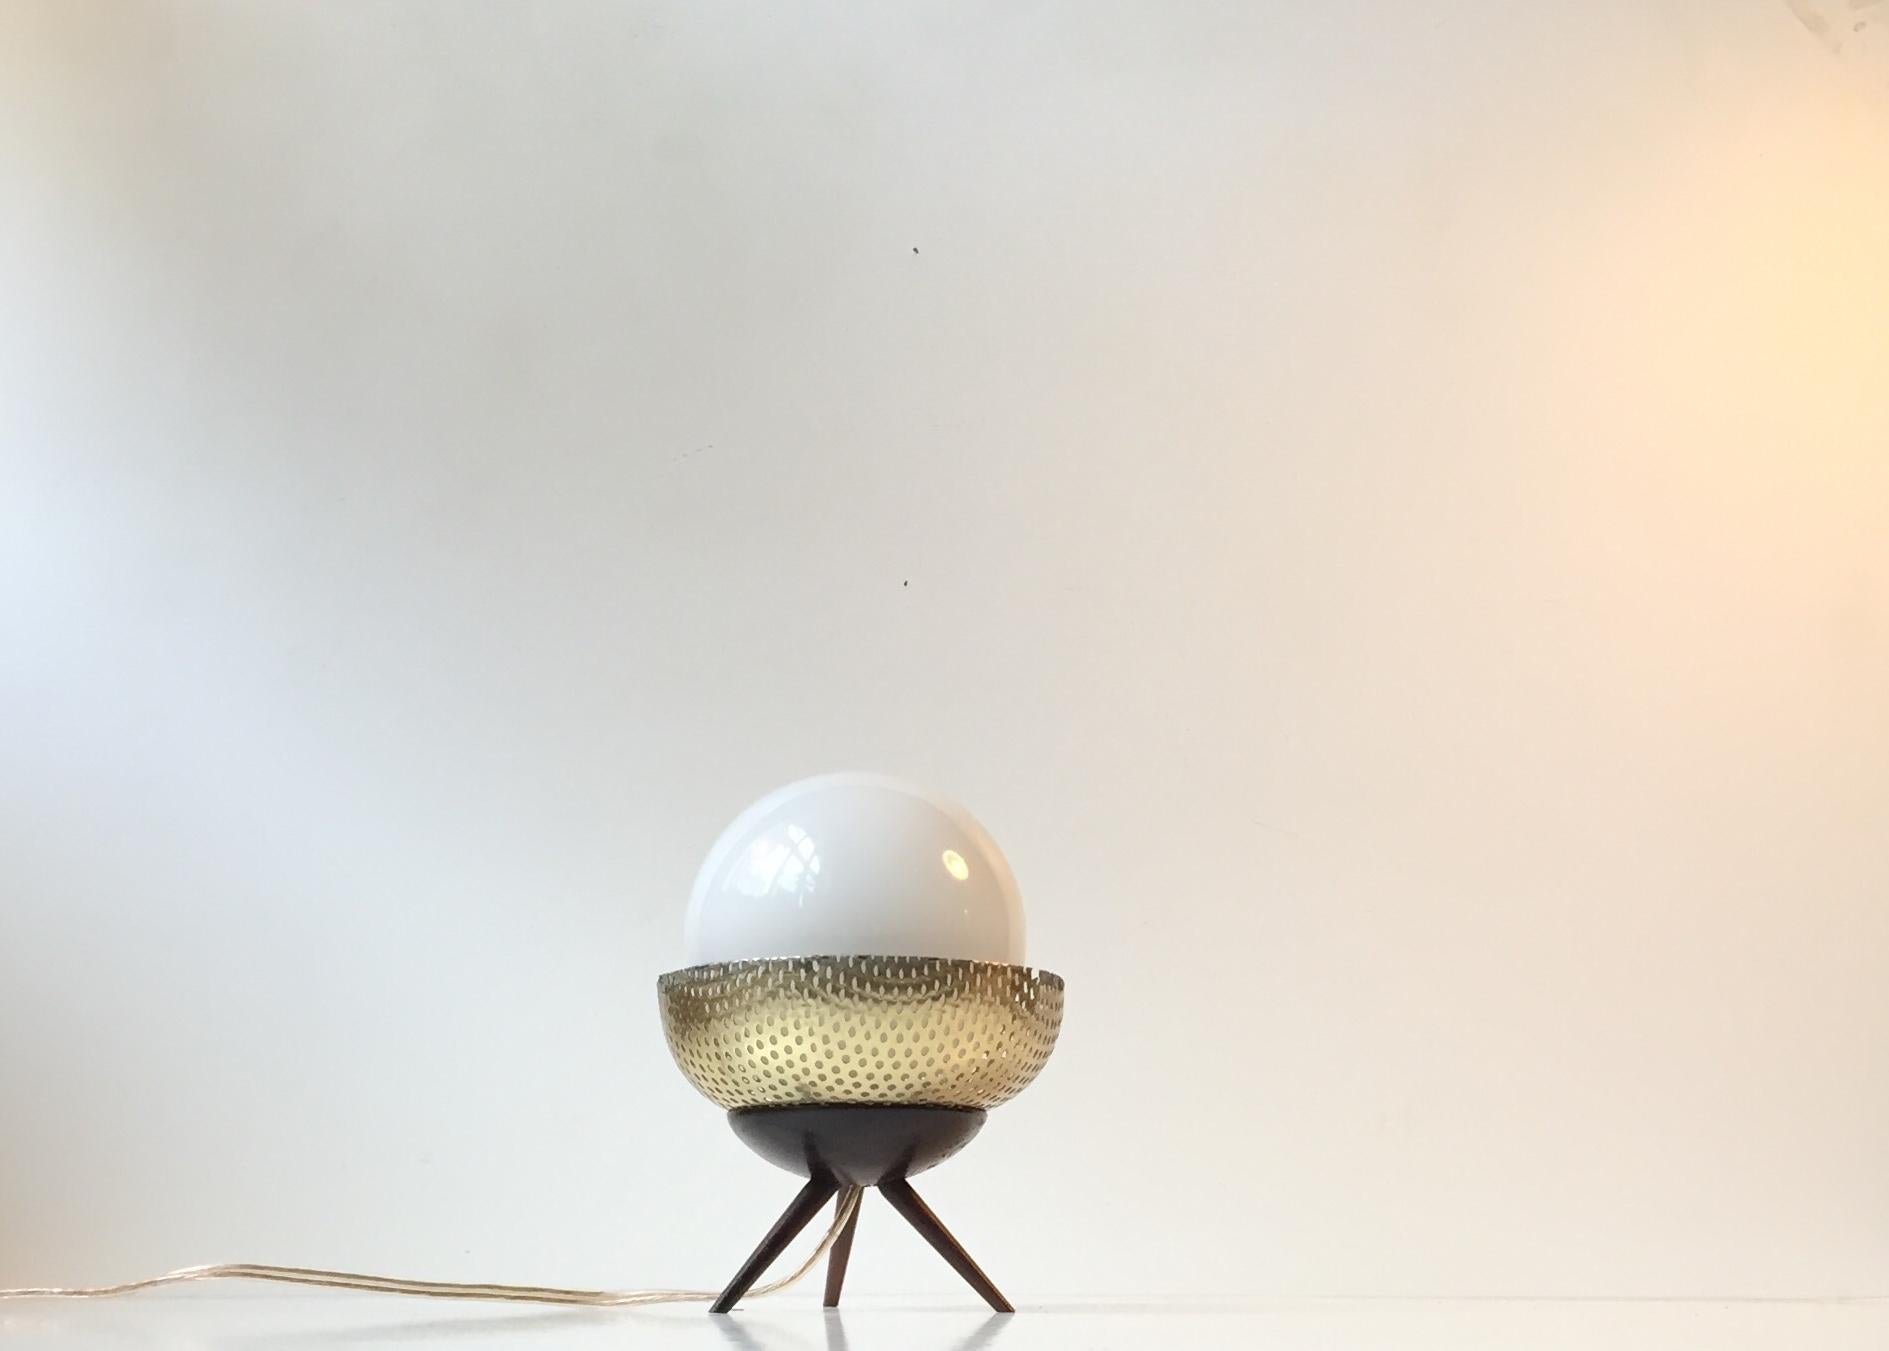 Small unusual table lamp composed of an ebony tripod base, an opaline glass sphere, and a perforated shade of brass-alloyed steel. In Scandinavia, this design is called a Space Bug or UFO. It was manufactured in Scandinavia during the 1960s.